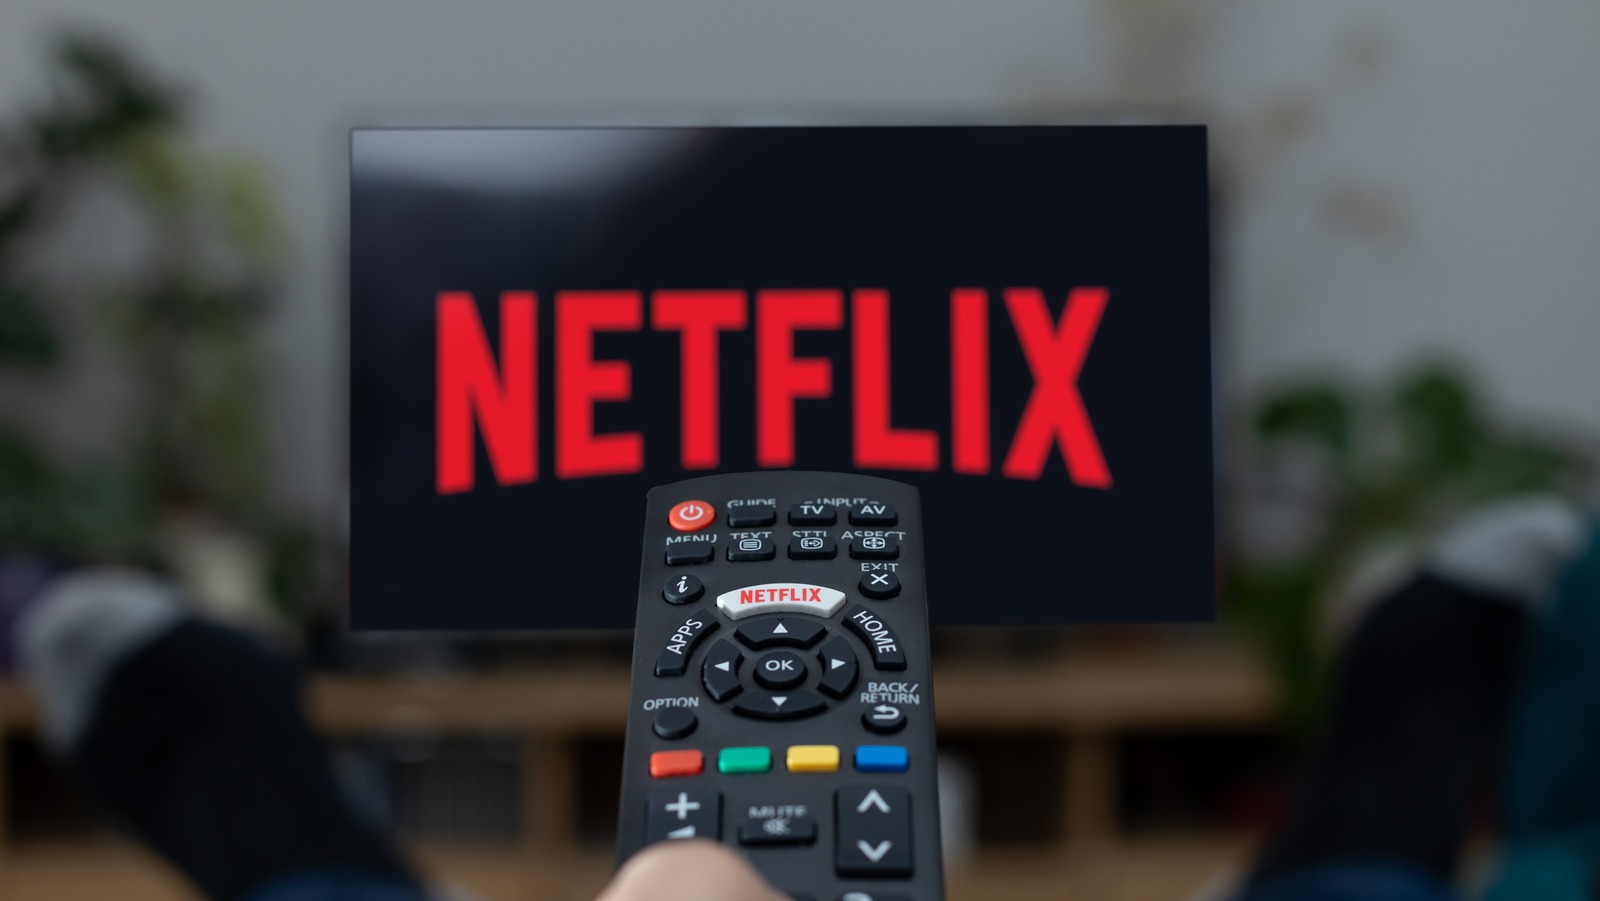 The 10 Most Annoying Netflix Issues (And How To Fix Them) – SlashGear